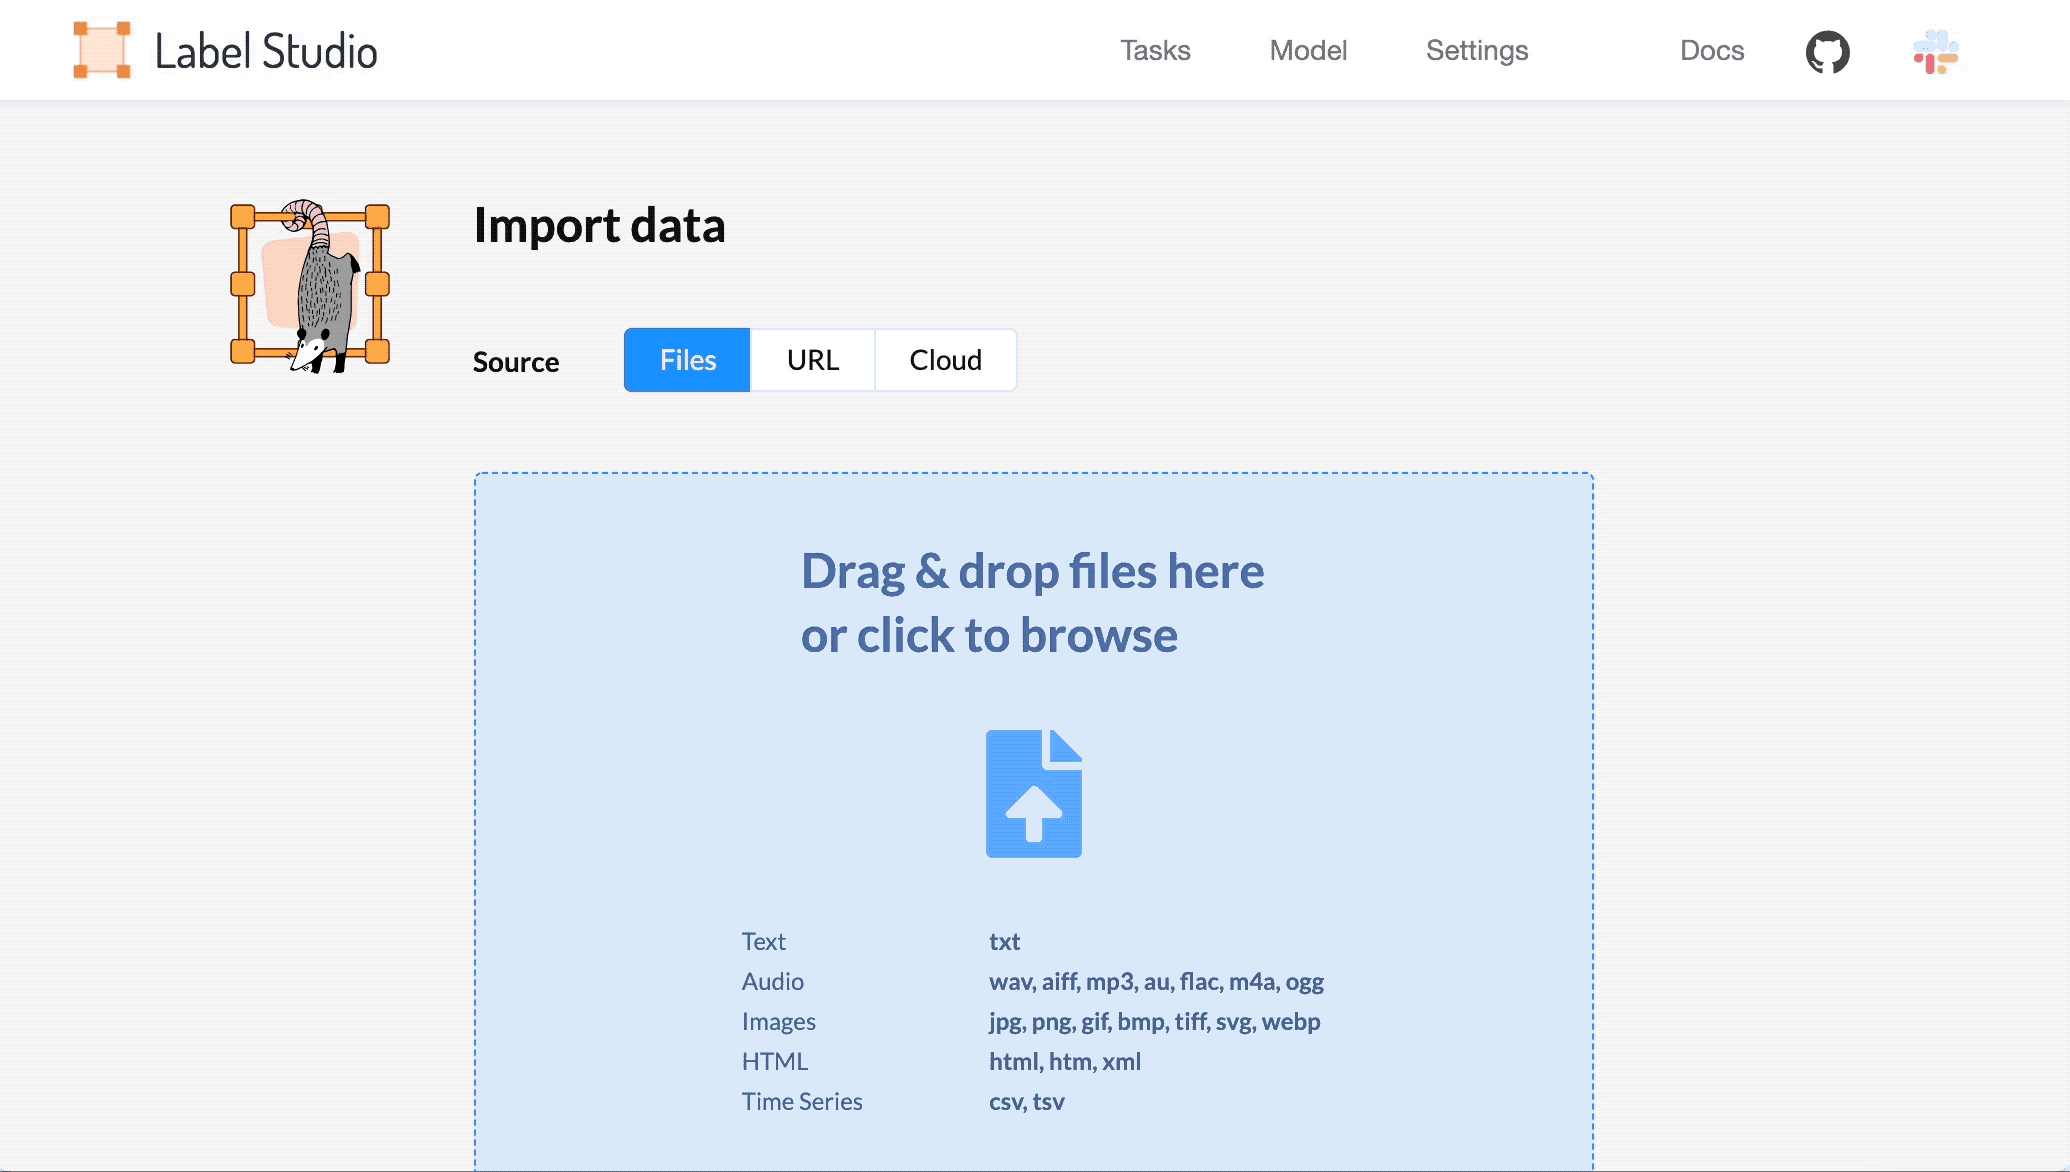 GIF showing how to import data into Label Studio. Content duplicated in surrounding text.